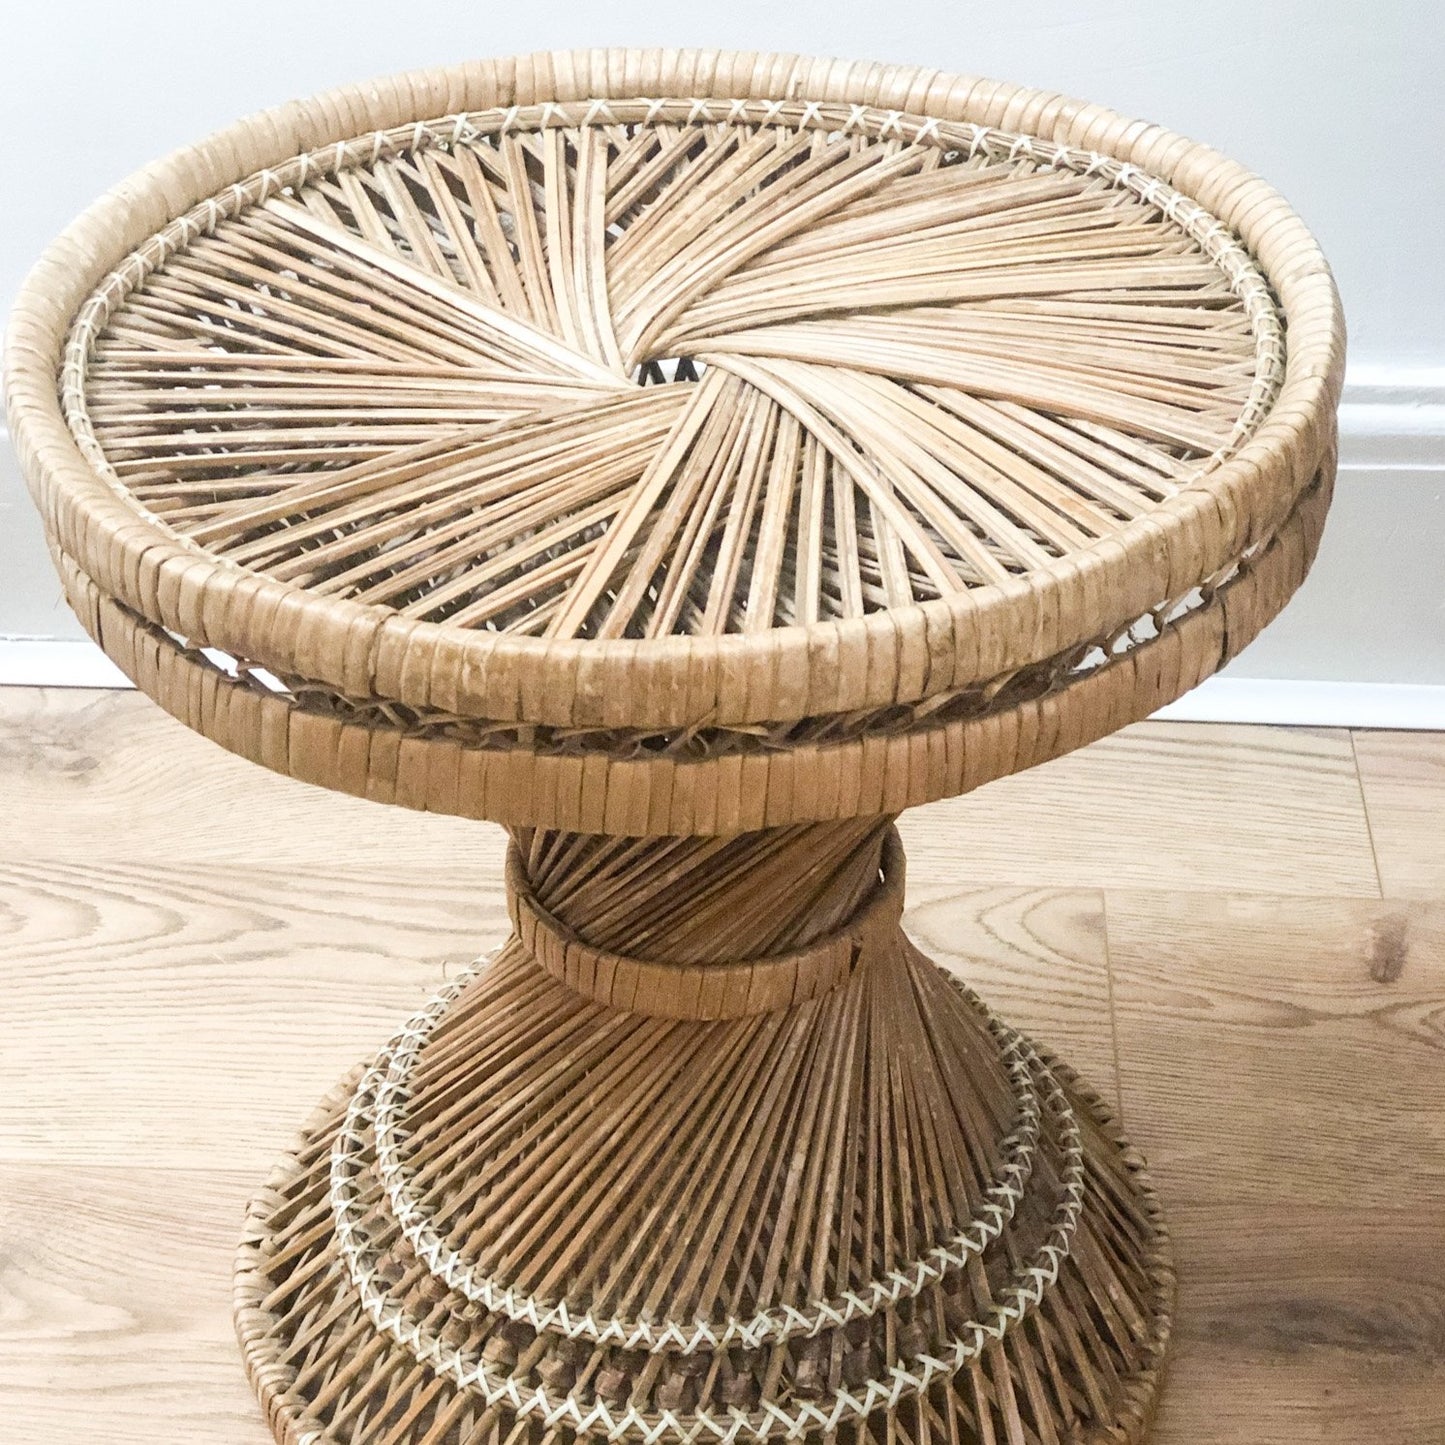 VINTAGE 1970s RATTAN PLANT STAND / SIDE TABLE